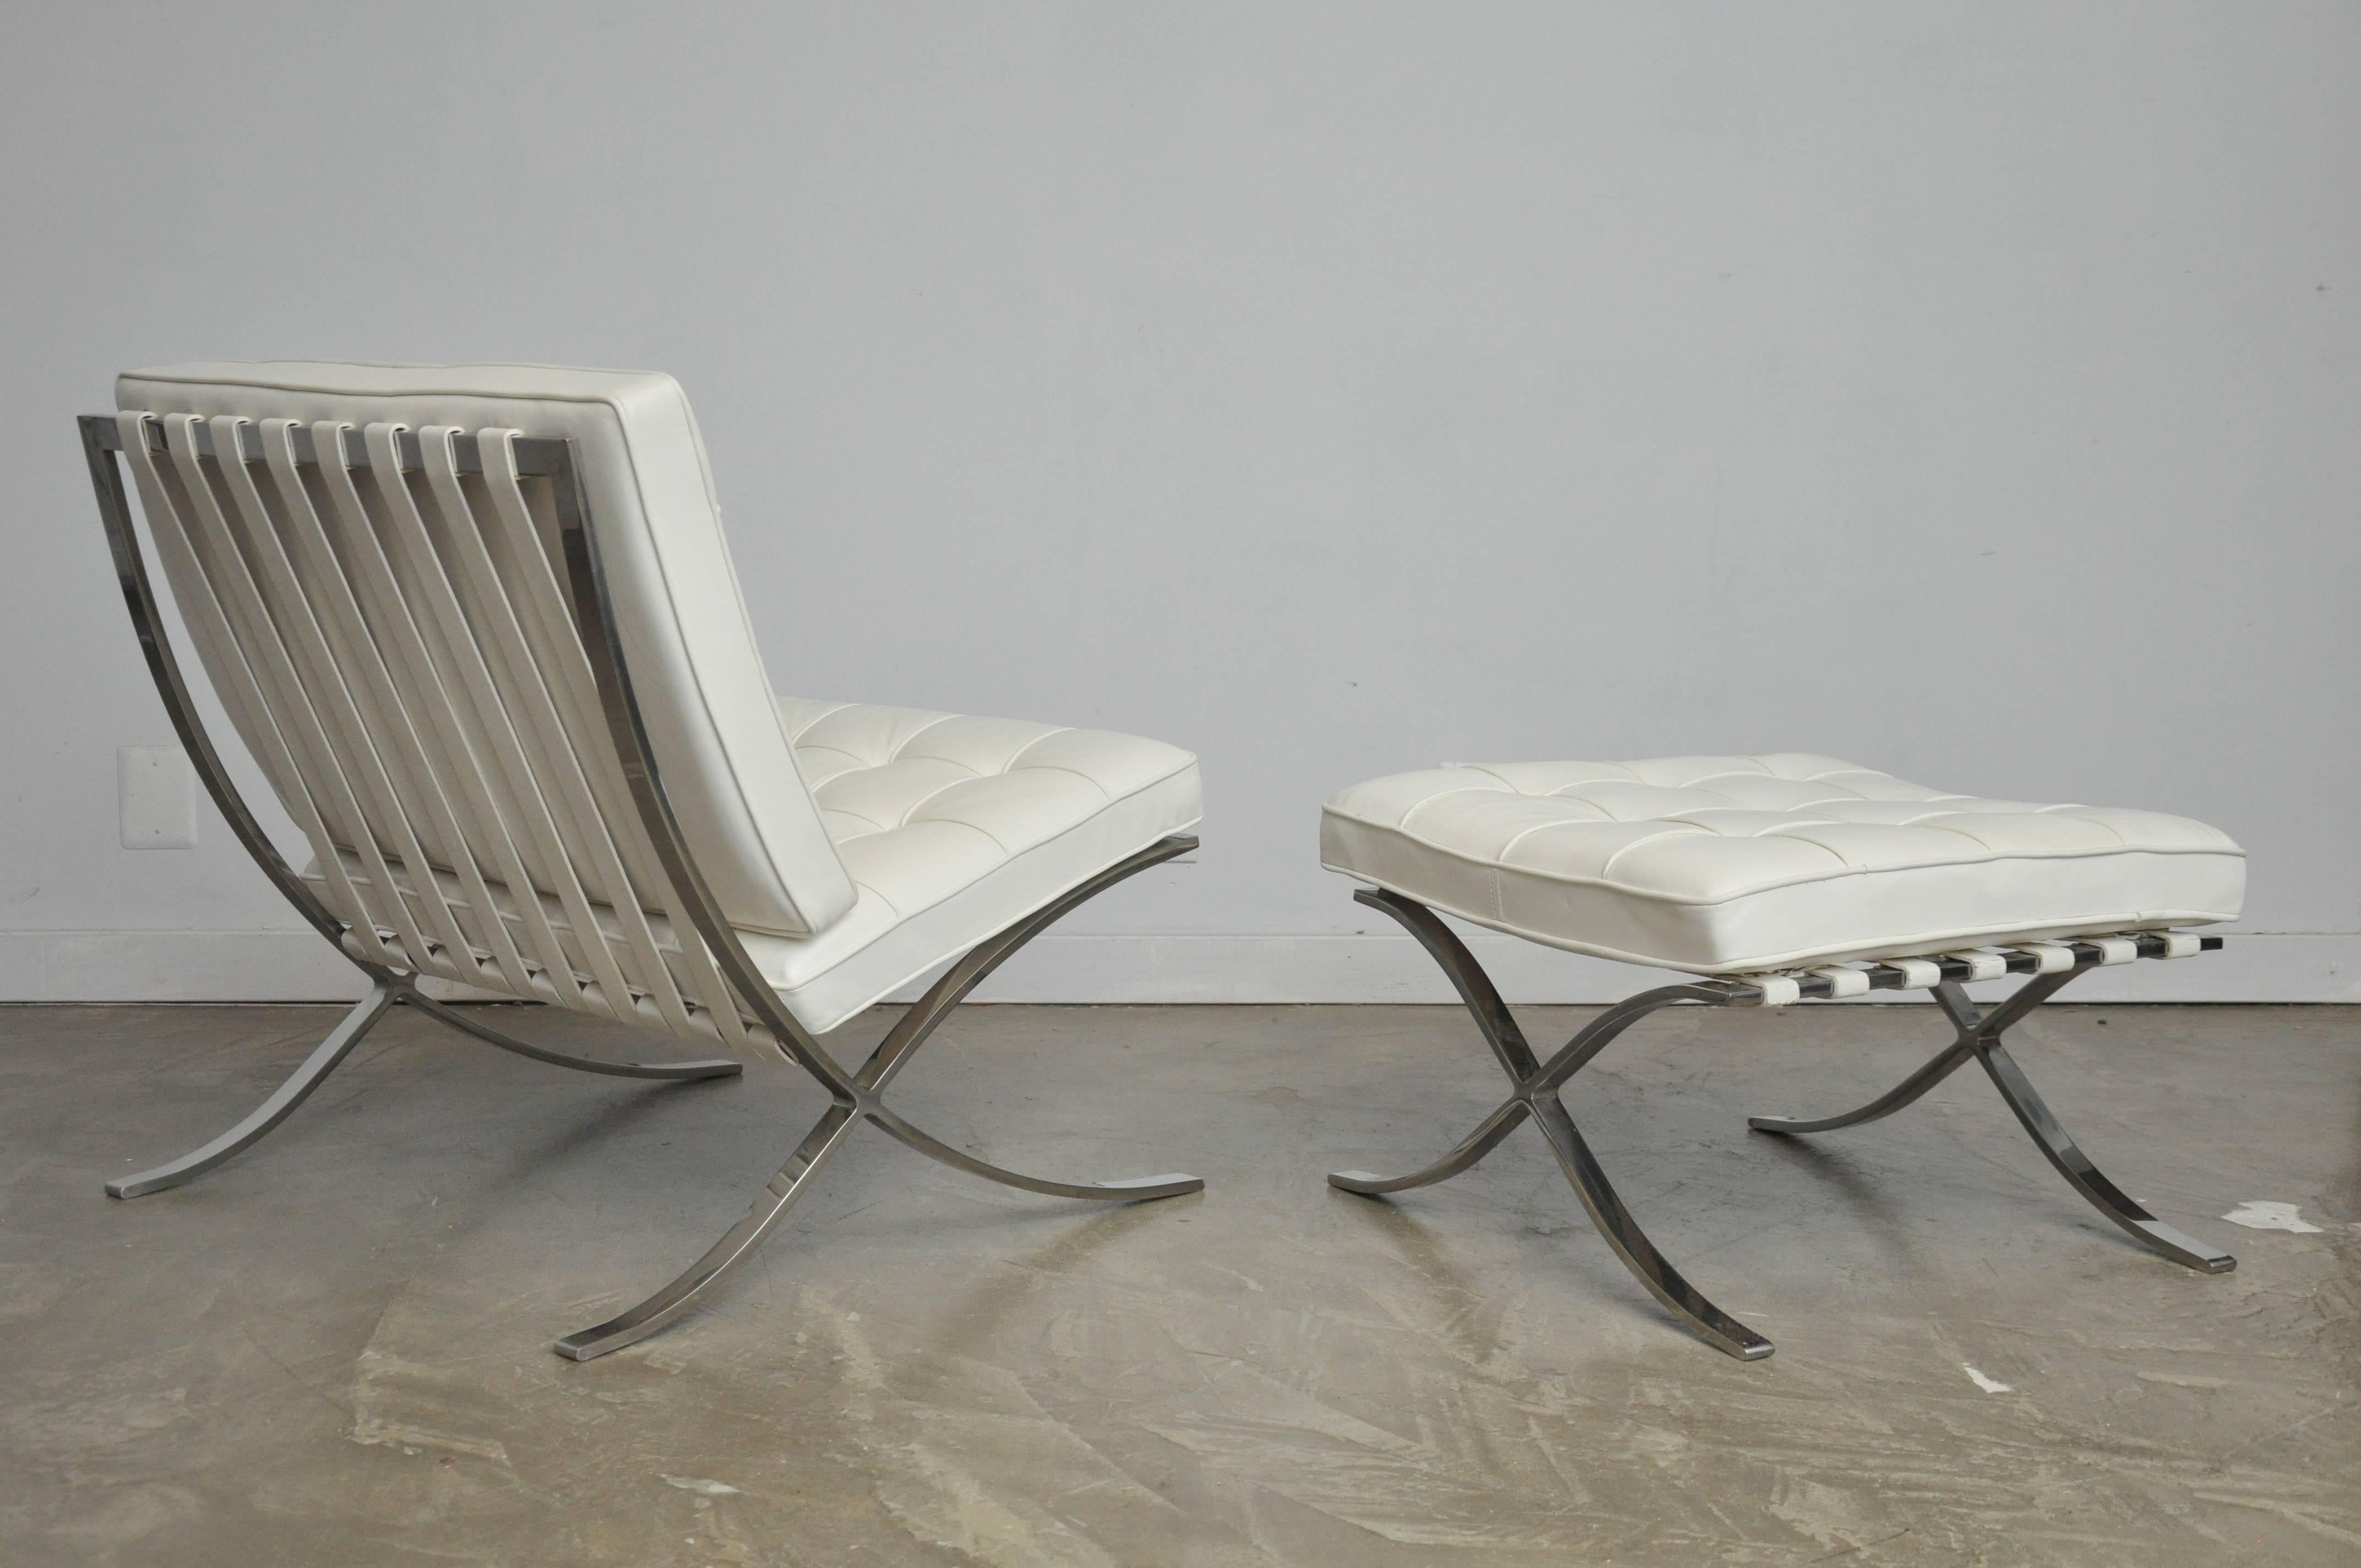 Stainless Steel Mies van der Rohe Barcelona Chair and Ottoman, Knoll, 1970